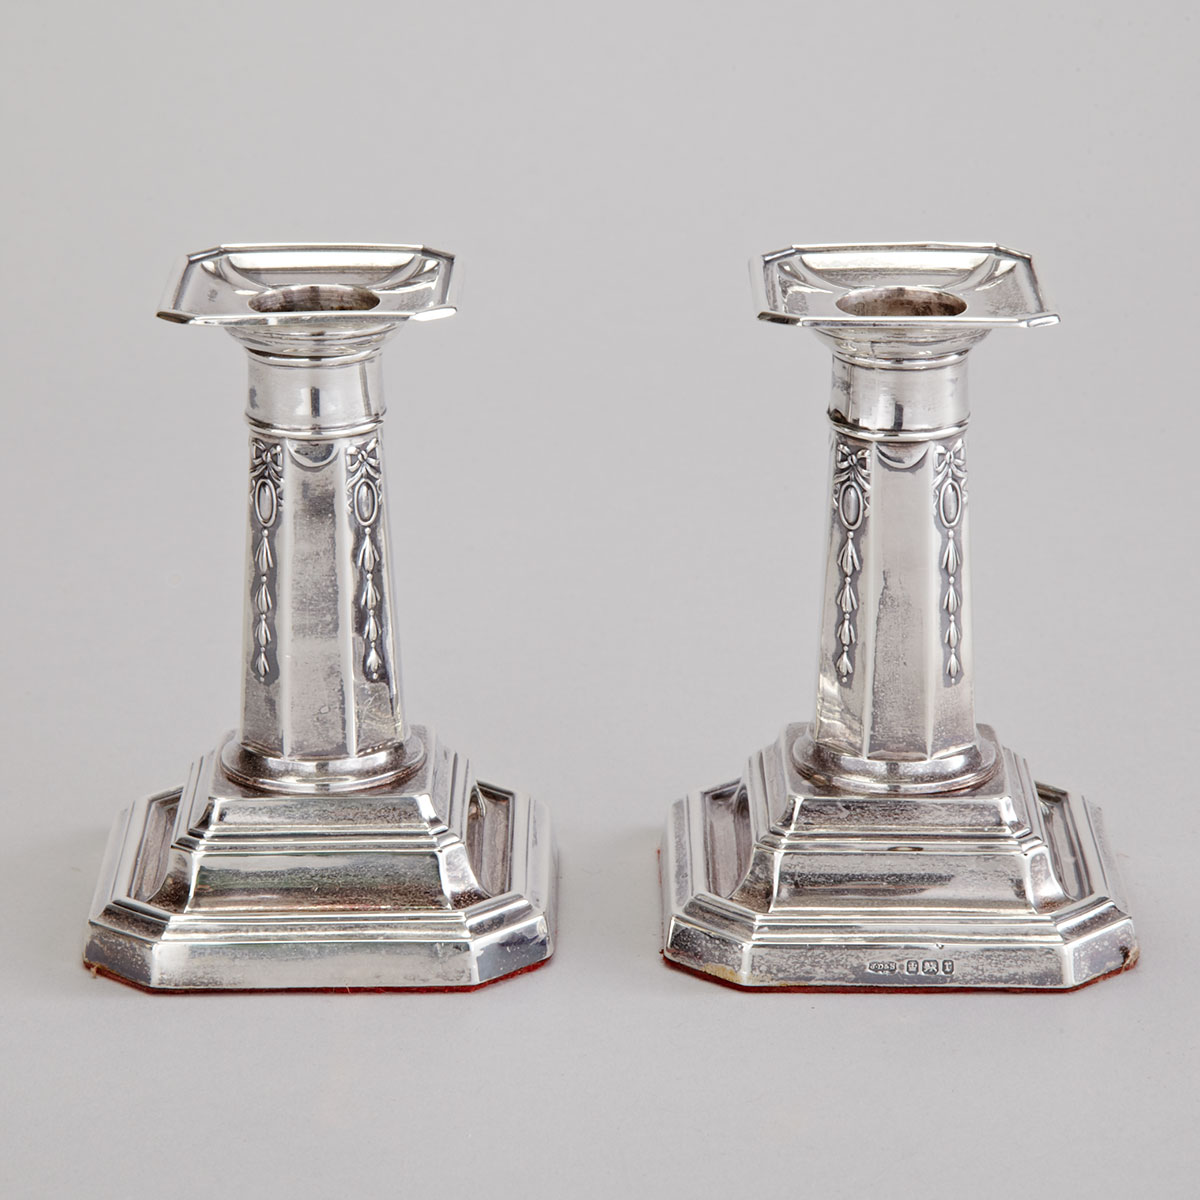 Pair of Edwardian Silver Small Candlesticks, James Dixon & Sons, Sheffield, 1909